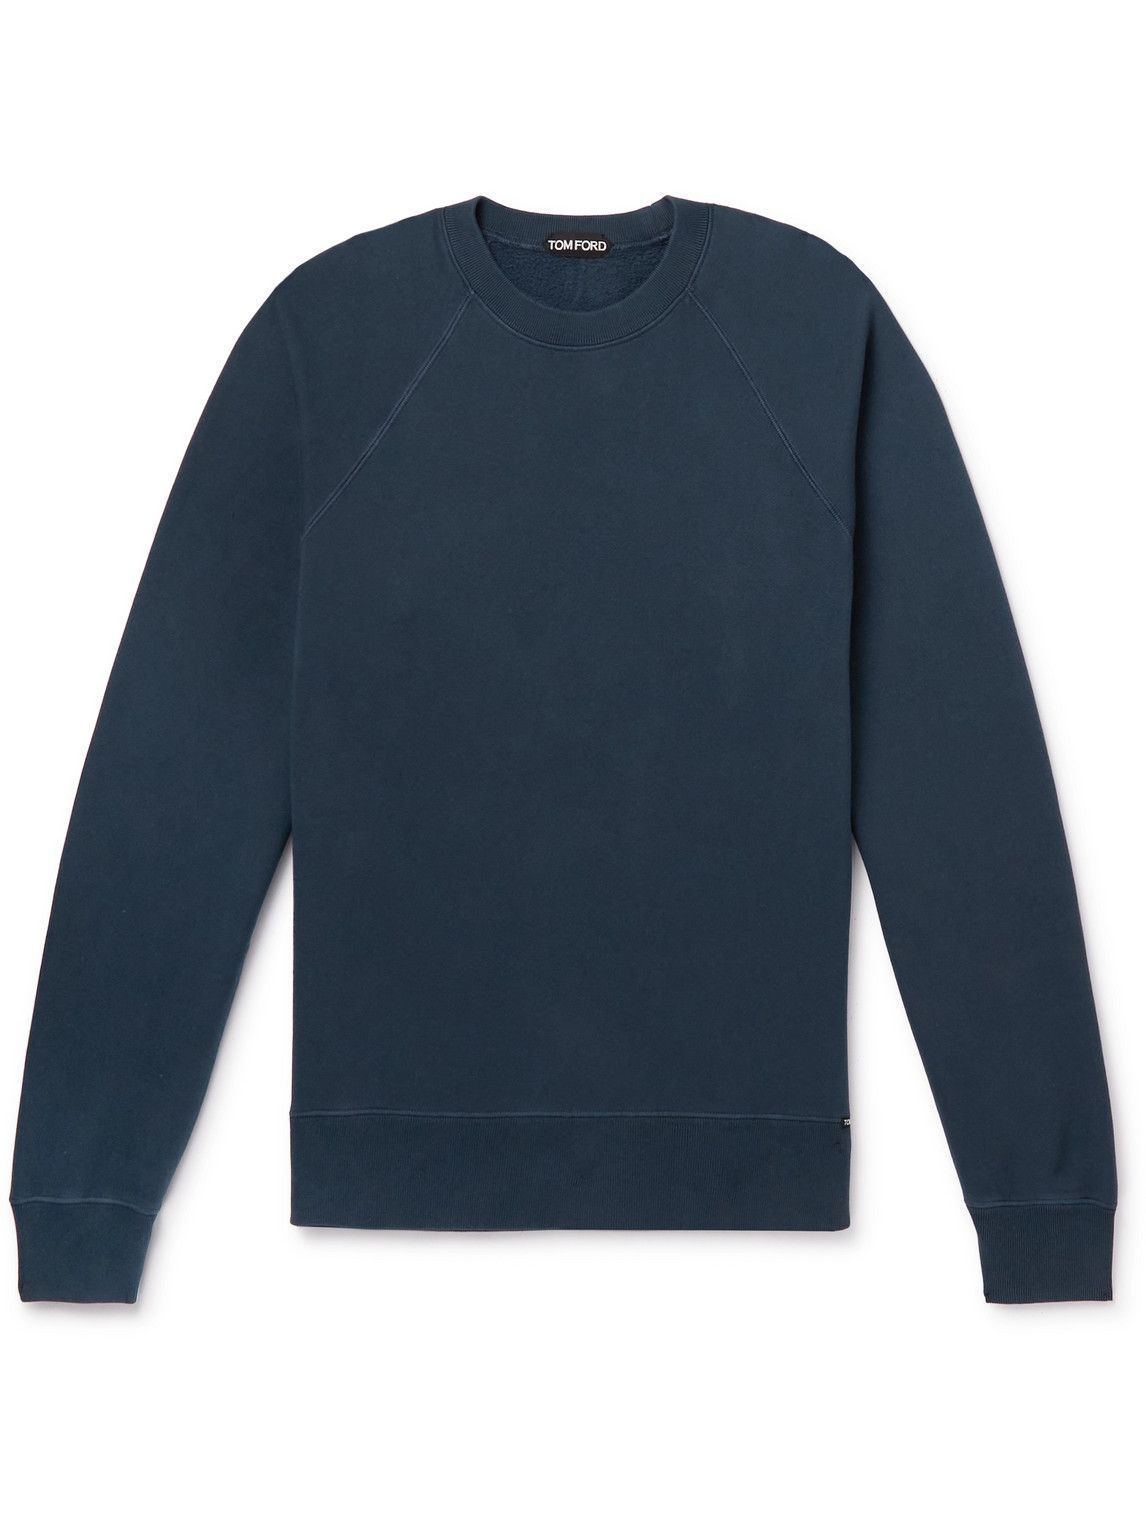 TOM FORD - Garment-Dyed Cotton-Jersey Sweatshirt - Blue TOM FORD